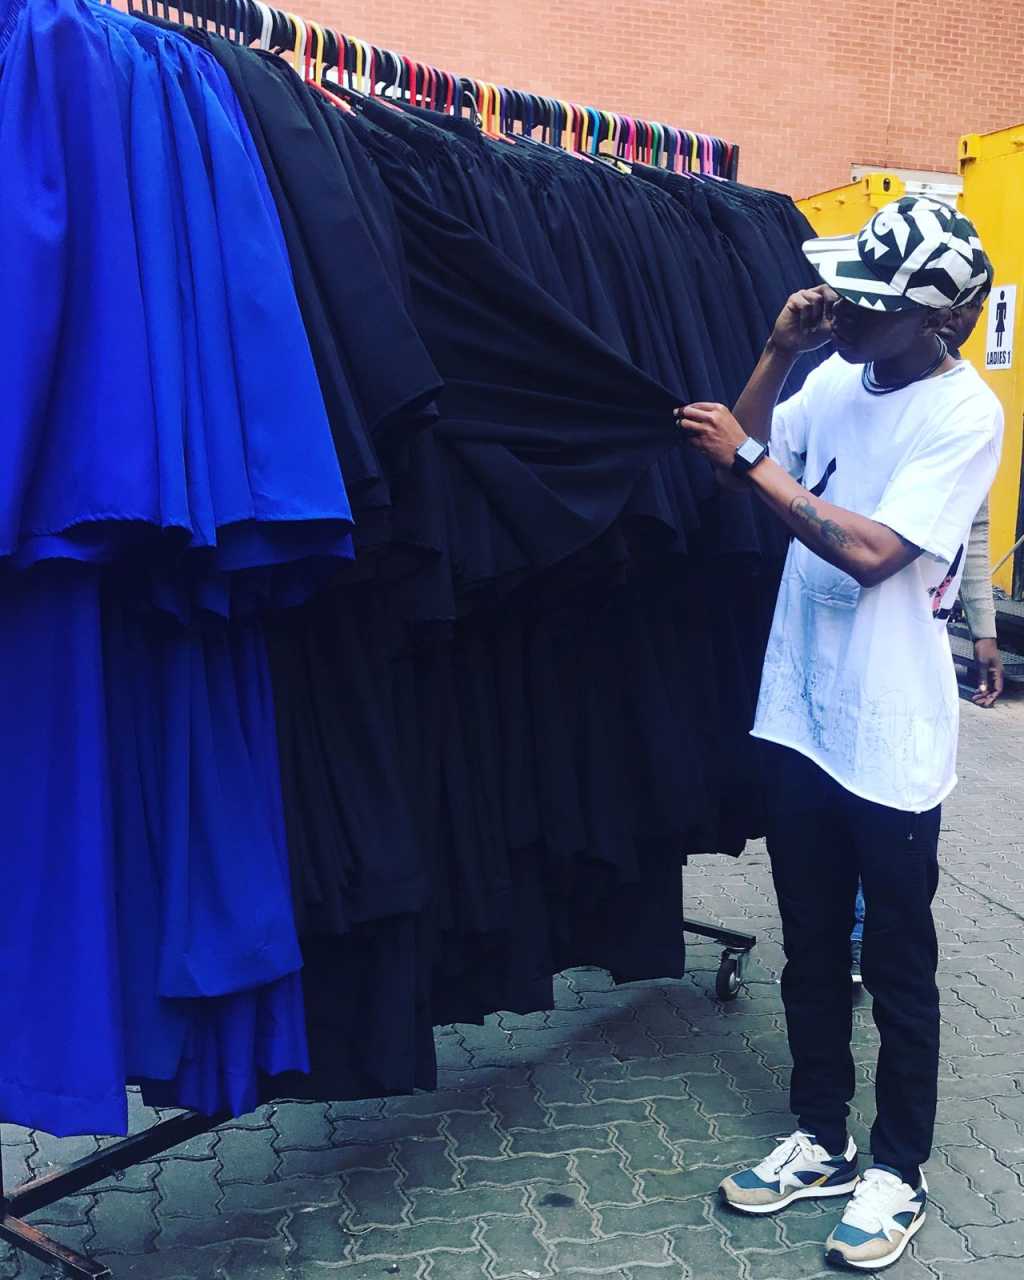  Miggs Foreal suffered a blow through the hands of thieves on Wednesday night, as thieves broke into his home in Pretoria and stole the graduation gowns which were met for his students. 